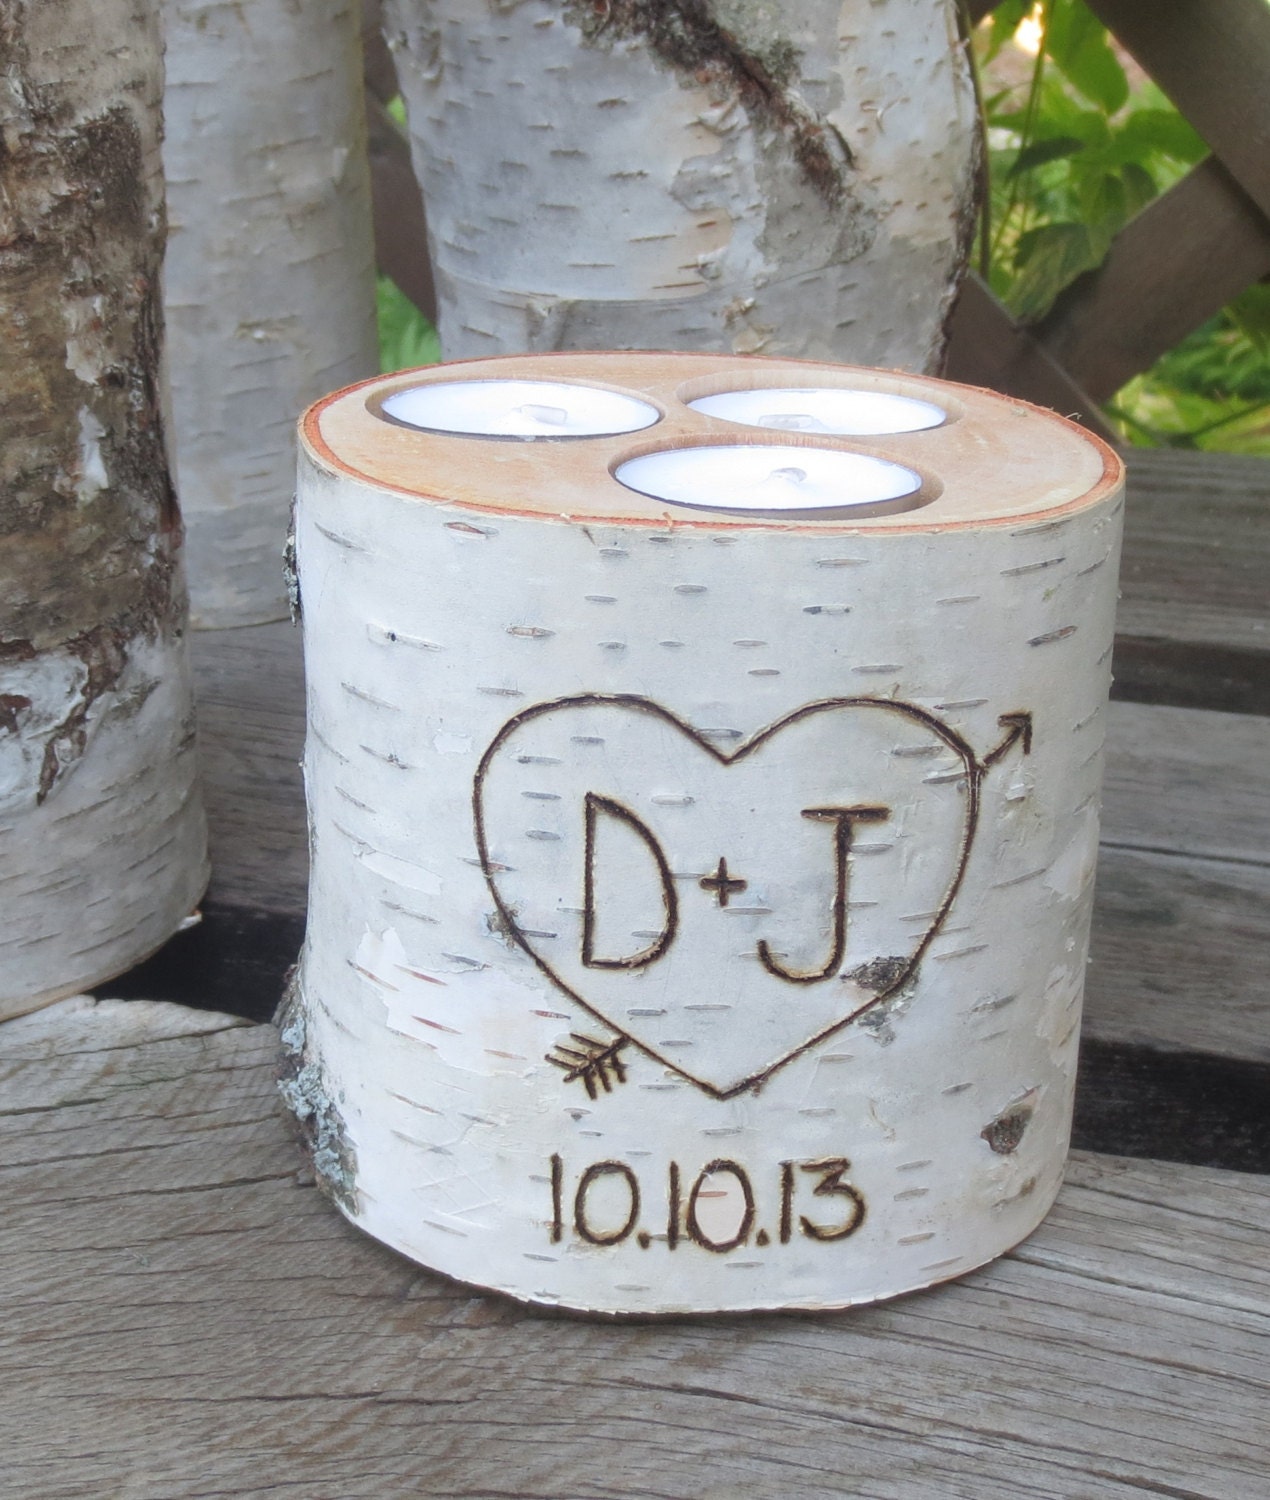 Birch Bark Candle Holder Personalized Rustic Wedding Centerpieces Wedding Date Cottage Chic Bridal Shower Decor Garden Party